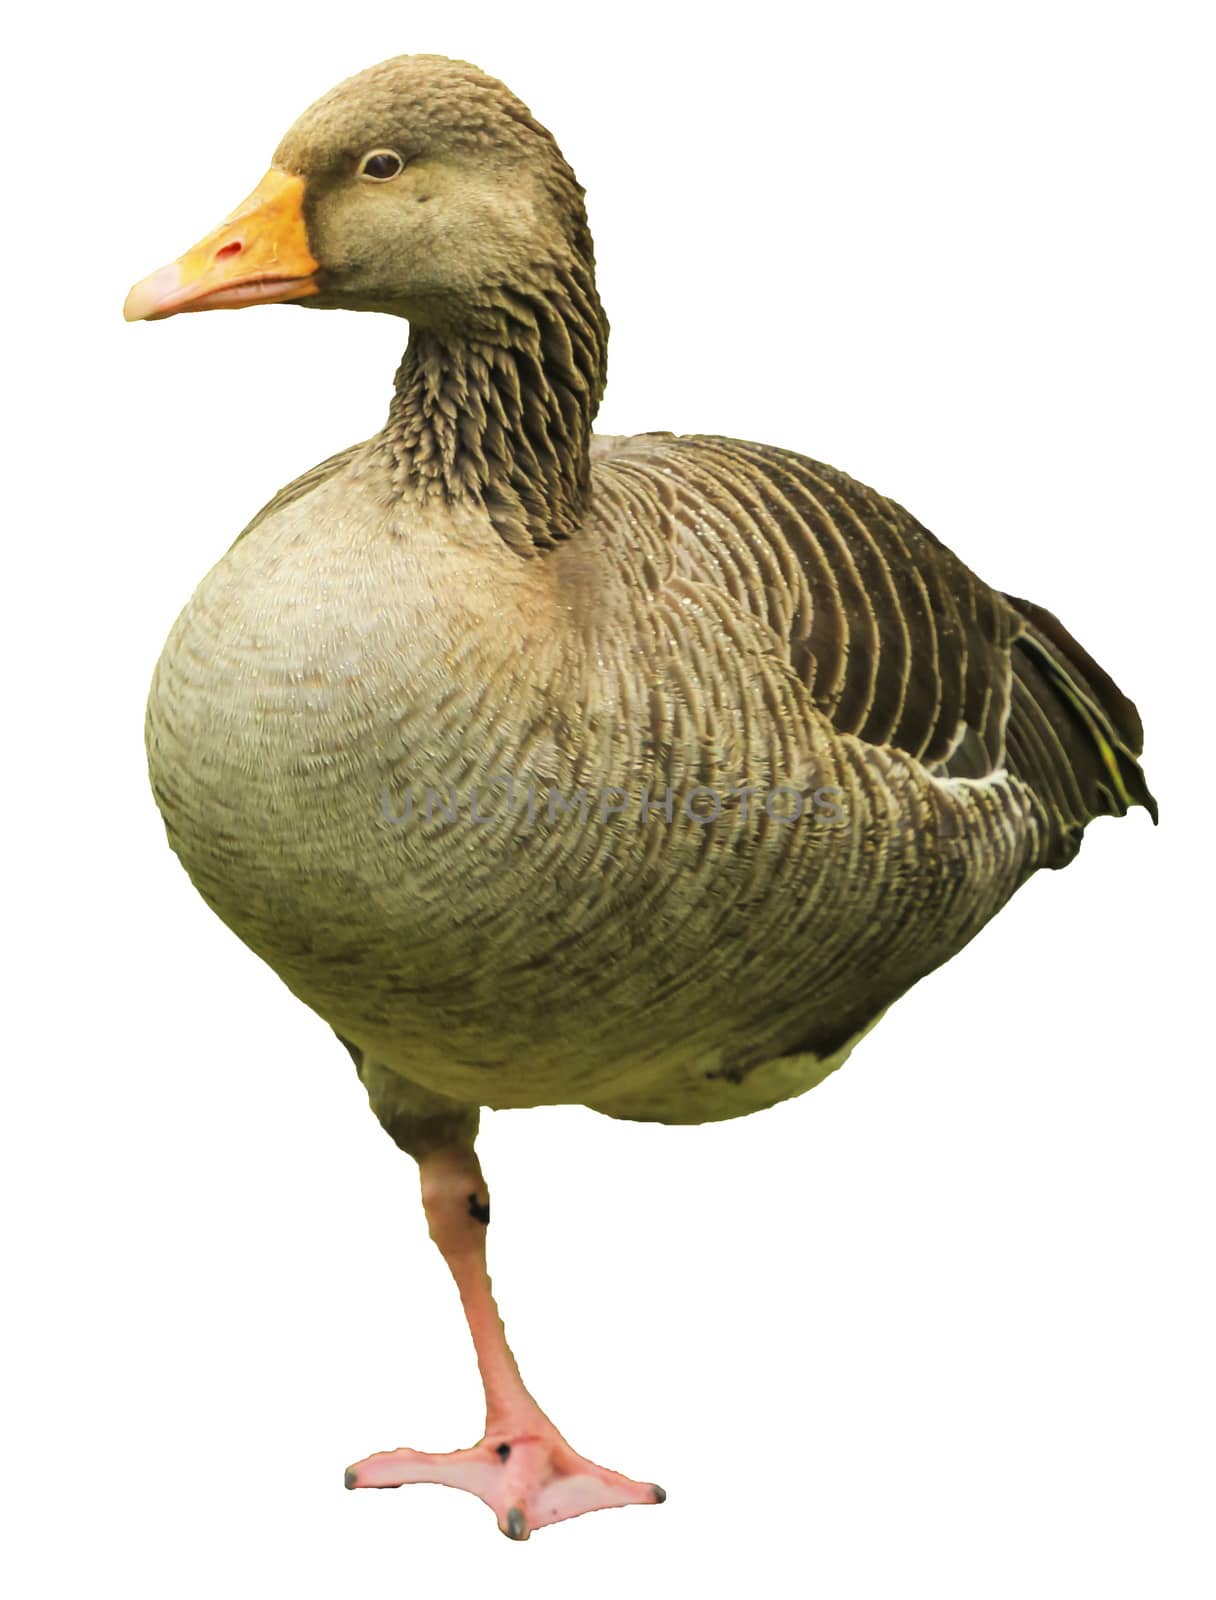 Greylag goose, anser anser, standing on one foot isolated in white background